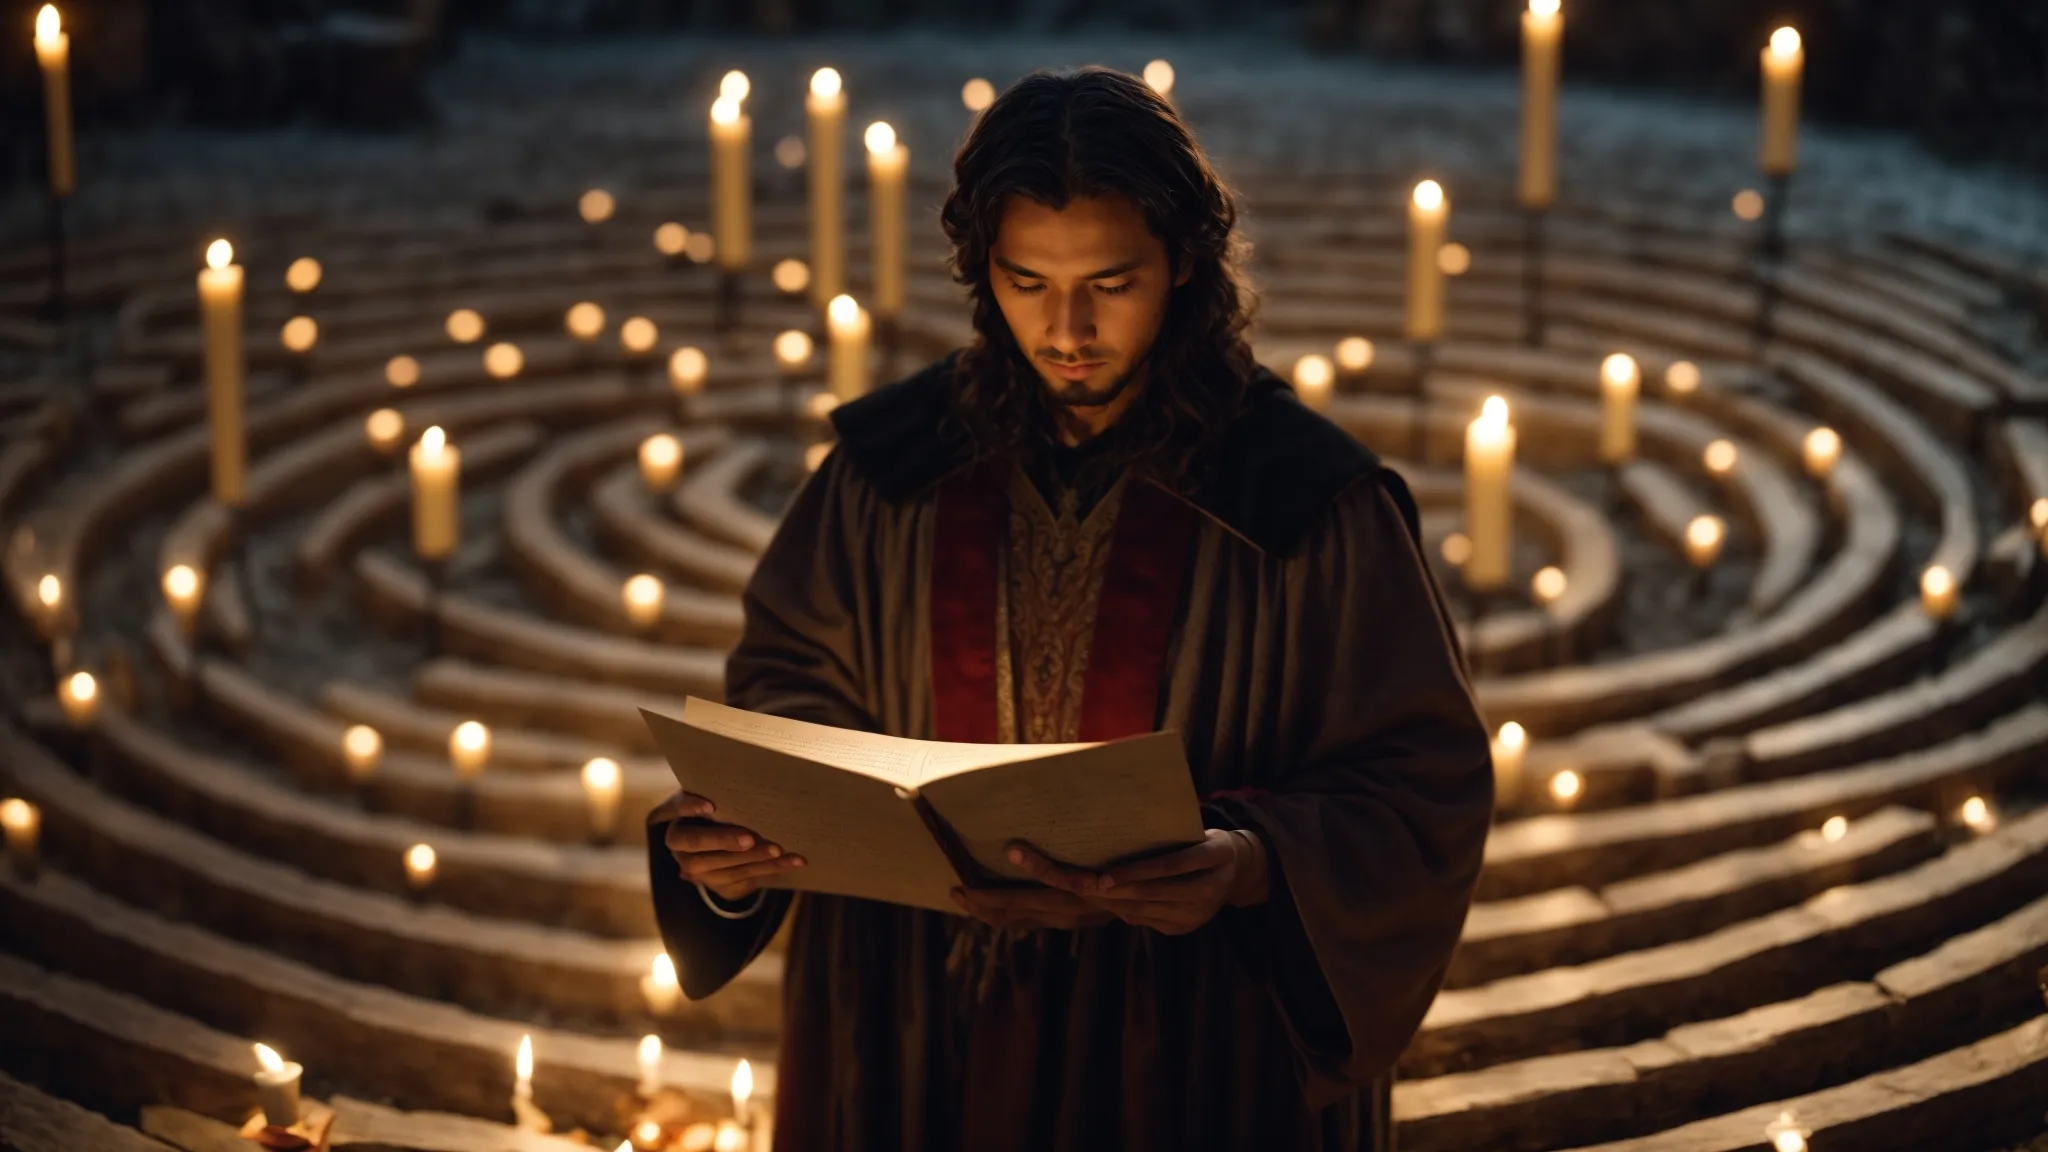 a medieval scholar navigates a candlelit labyrinth, holding a scroll symbolizing seo knowledge, with two distinct pathways diverging in the dim light.